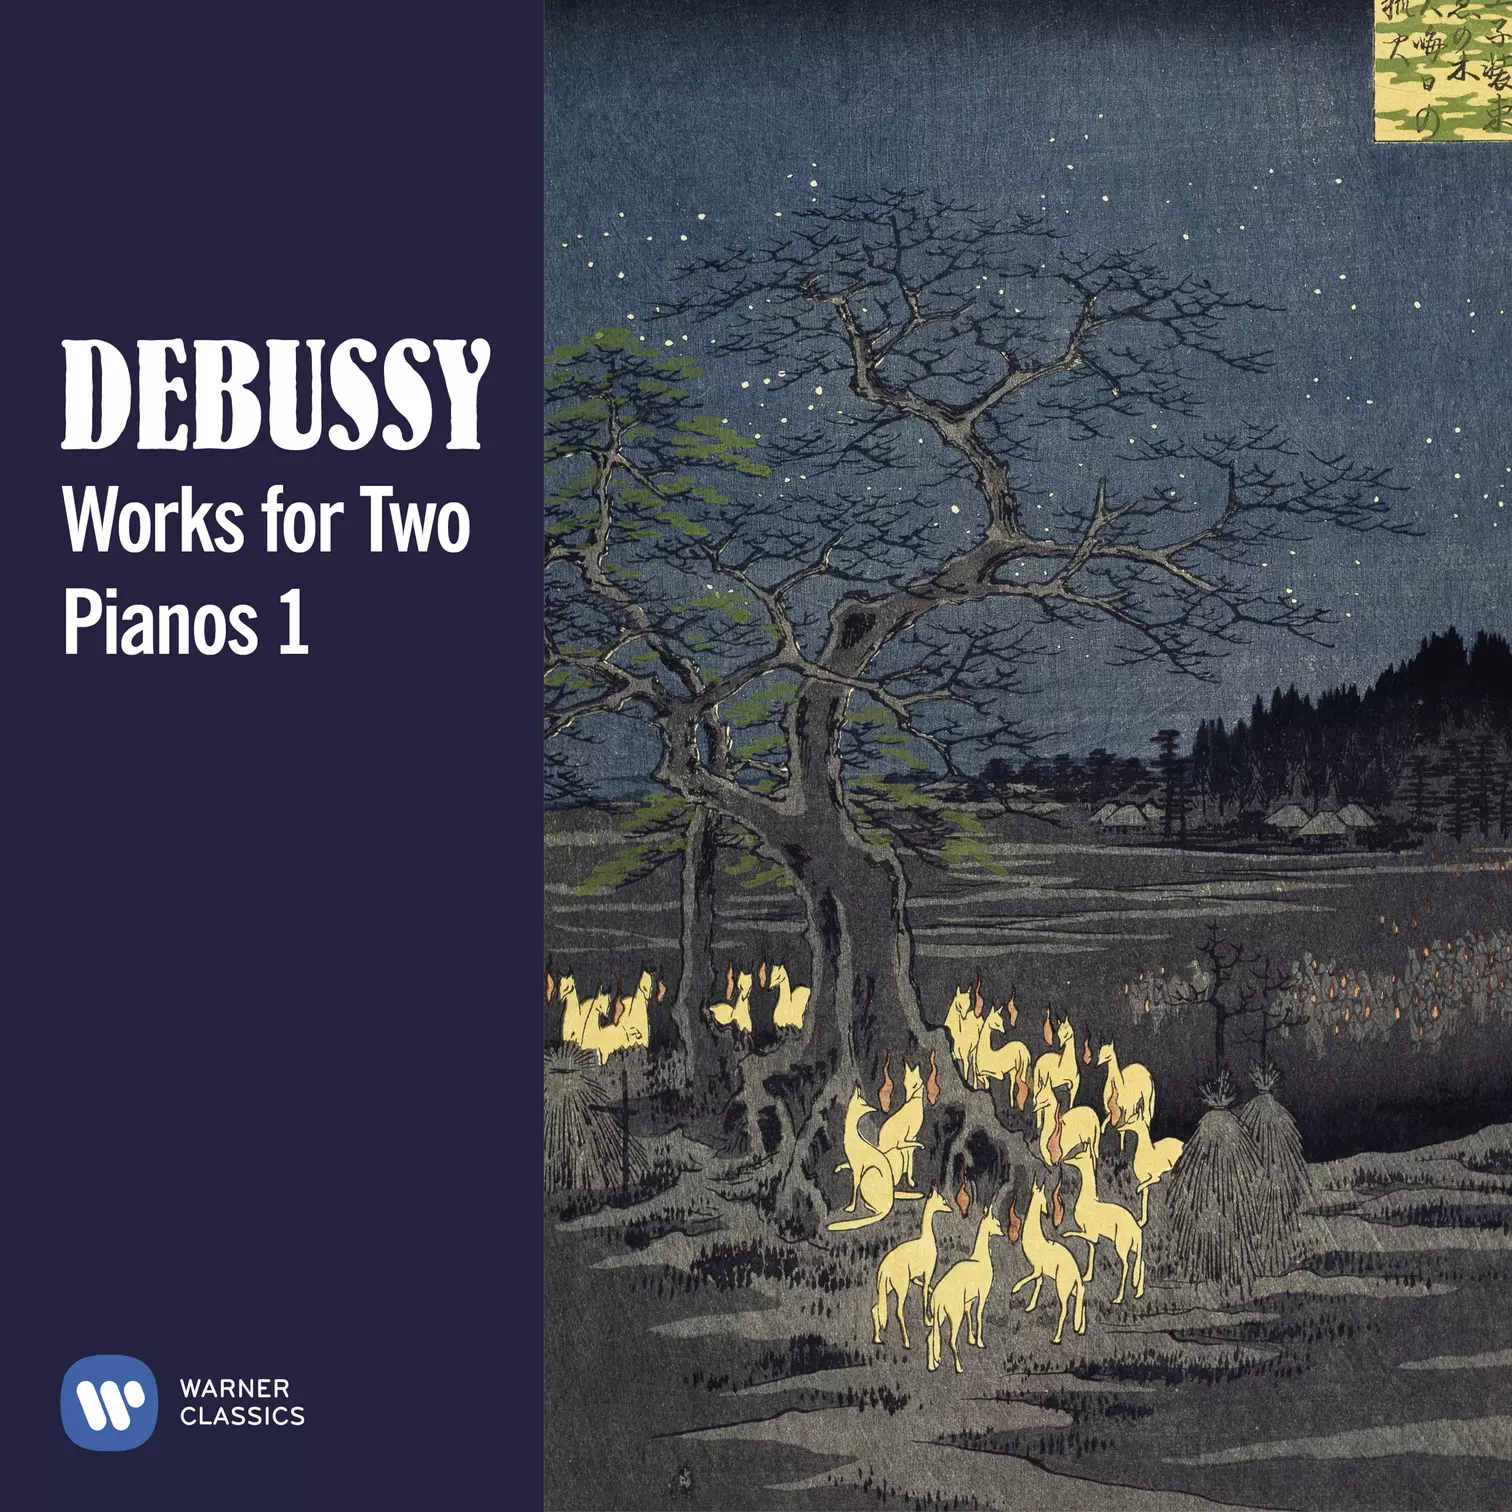 Debussy: Works for Two Pianos 1